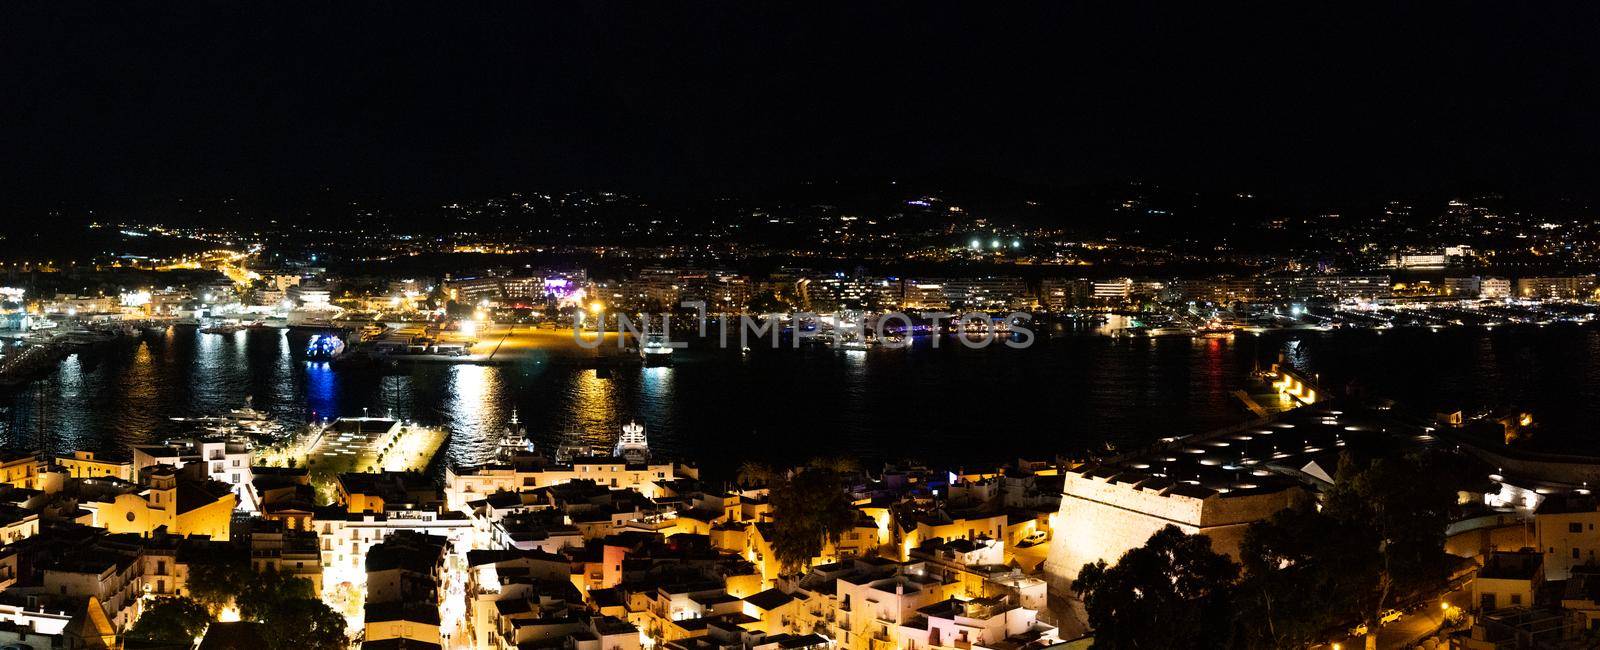 Panoramic night scene of the port of Ibiza town by LopezPastor